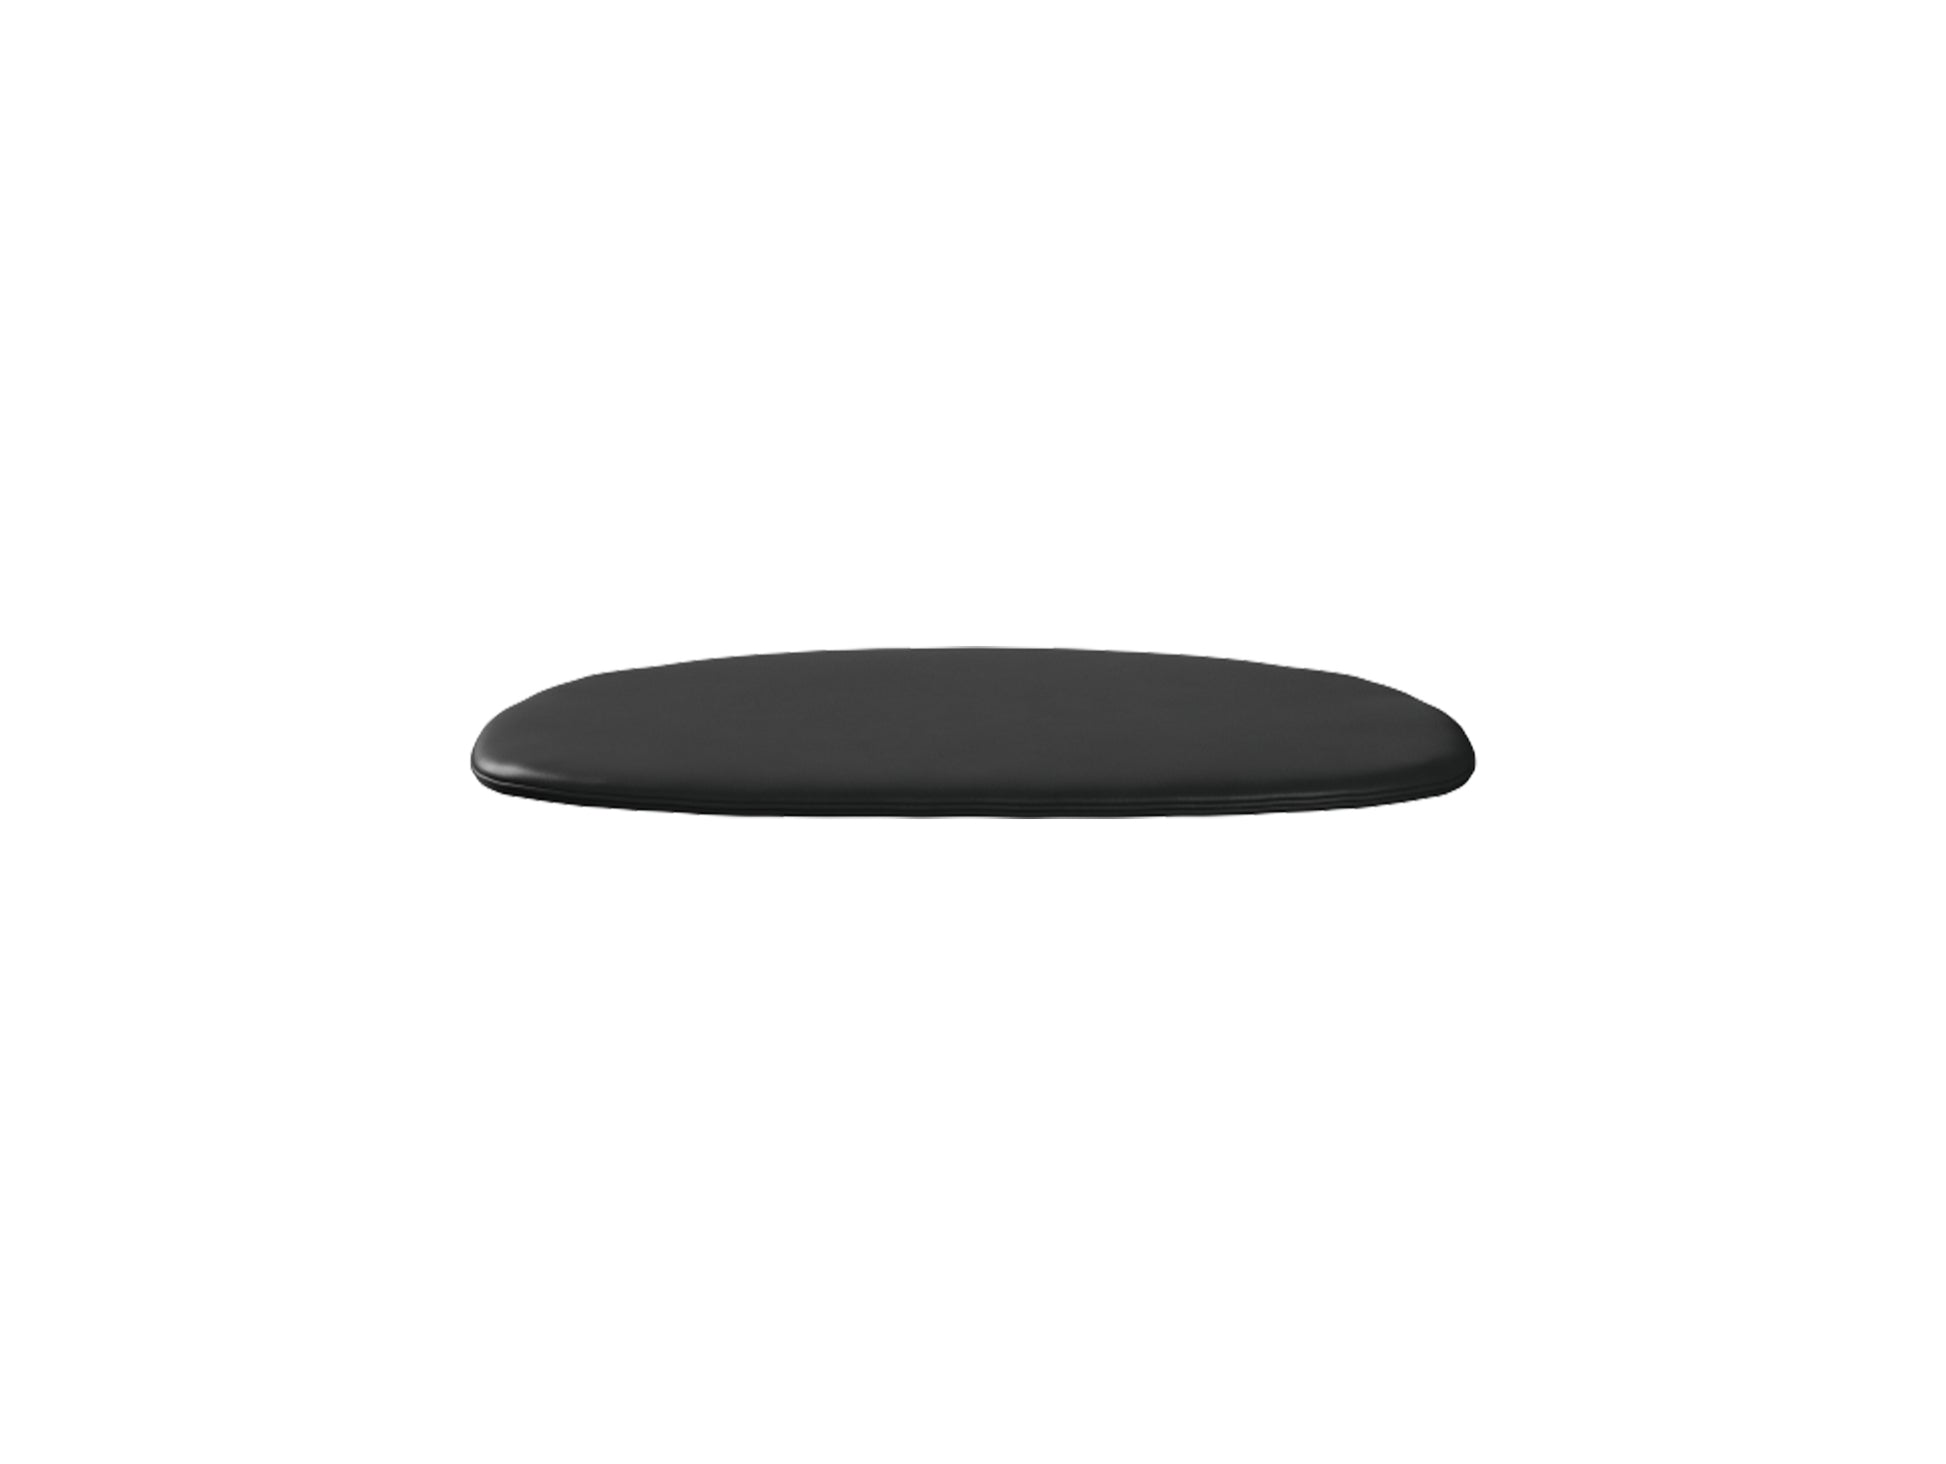 PK15 Dining Chair Seat Cushion by Fritz Hansen - Black Leather